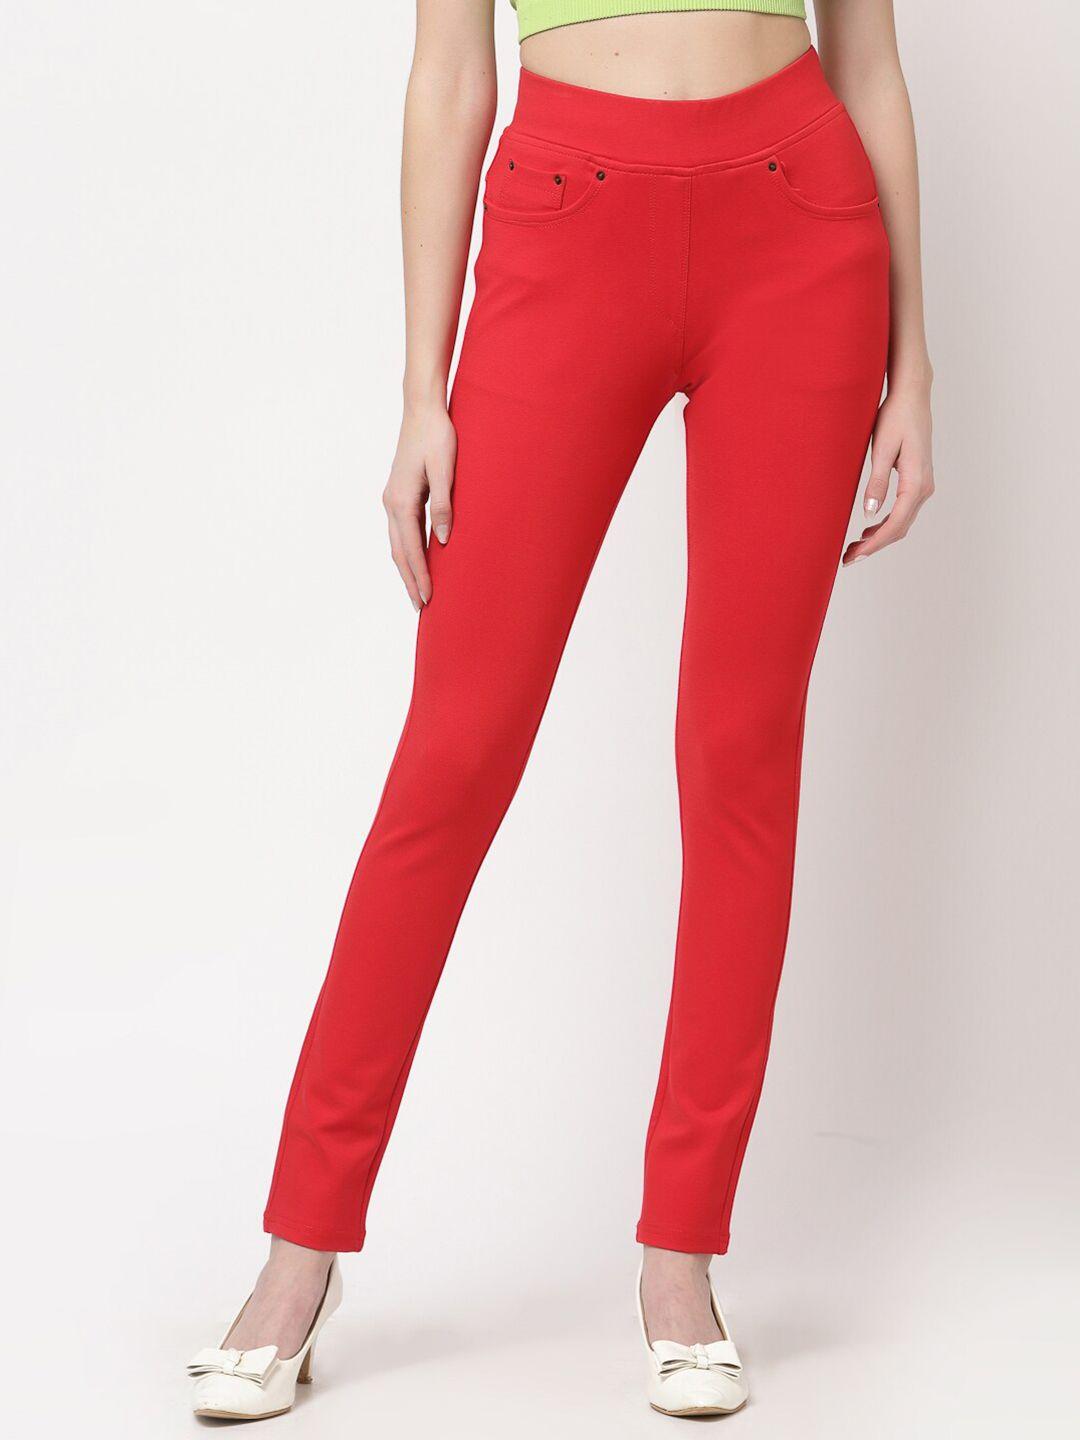 westwood-women-red-solid-cotton-skinny-fit-jegging